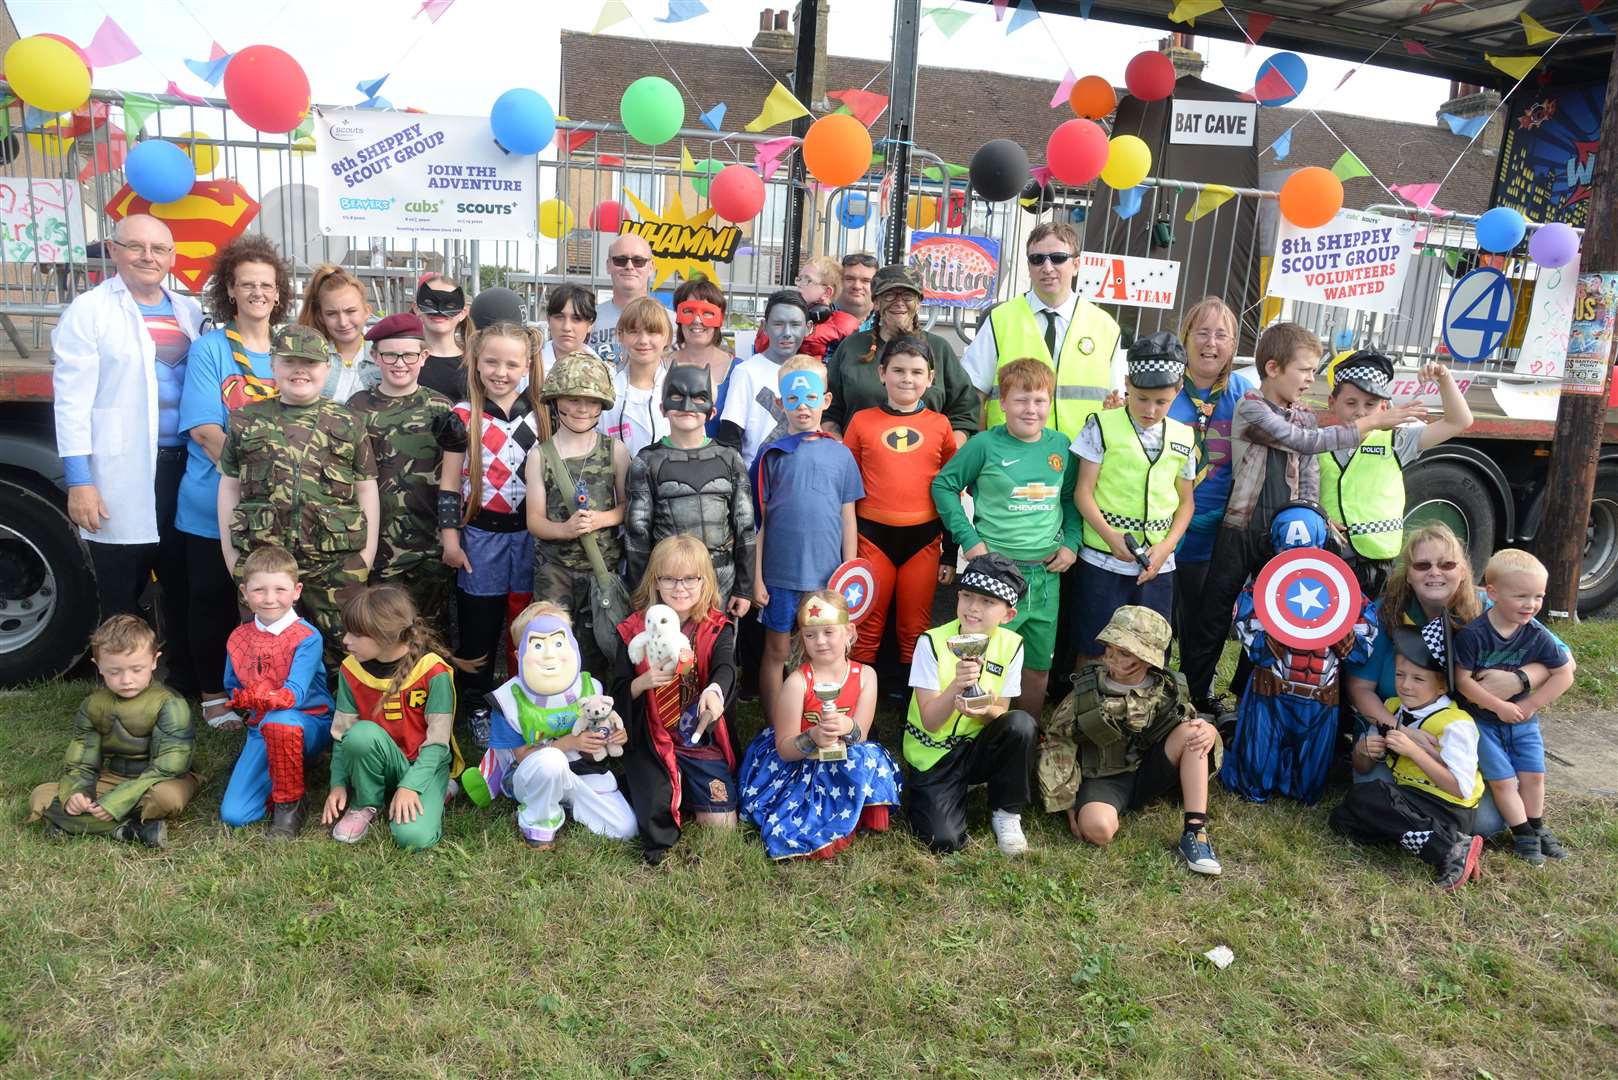 The 8th Sheppey Scout Group float in Sheerness Carnival on Saturday. Picture: Chris Davey. (15383734)